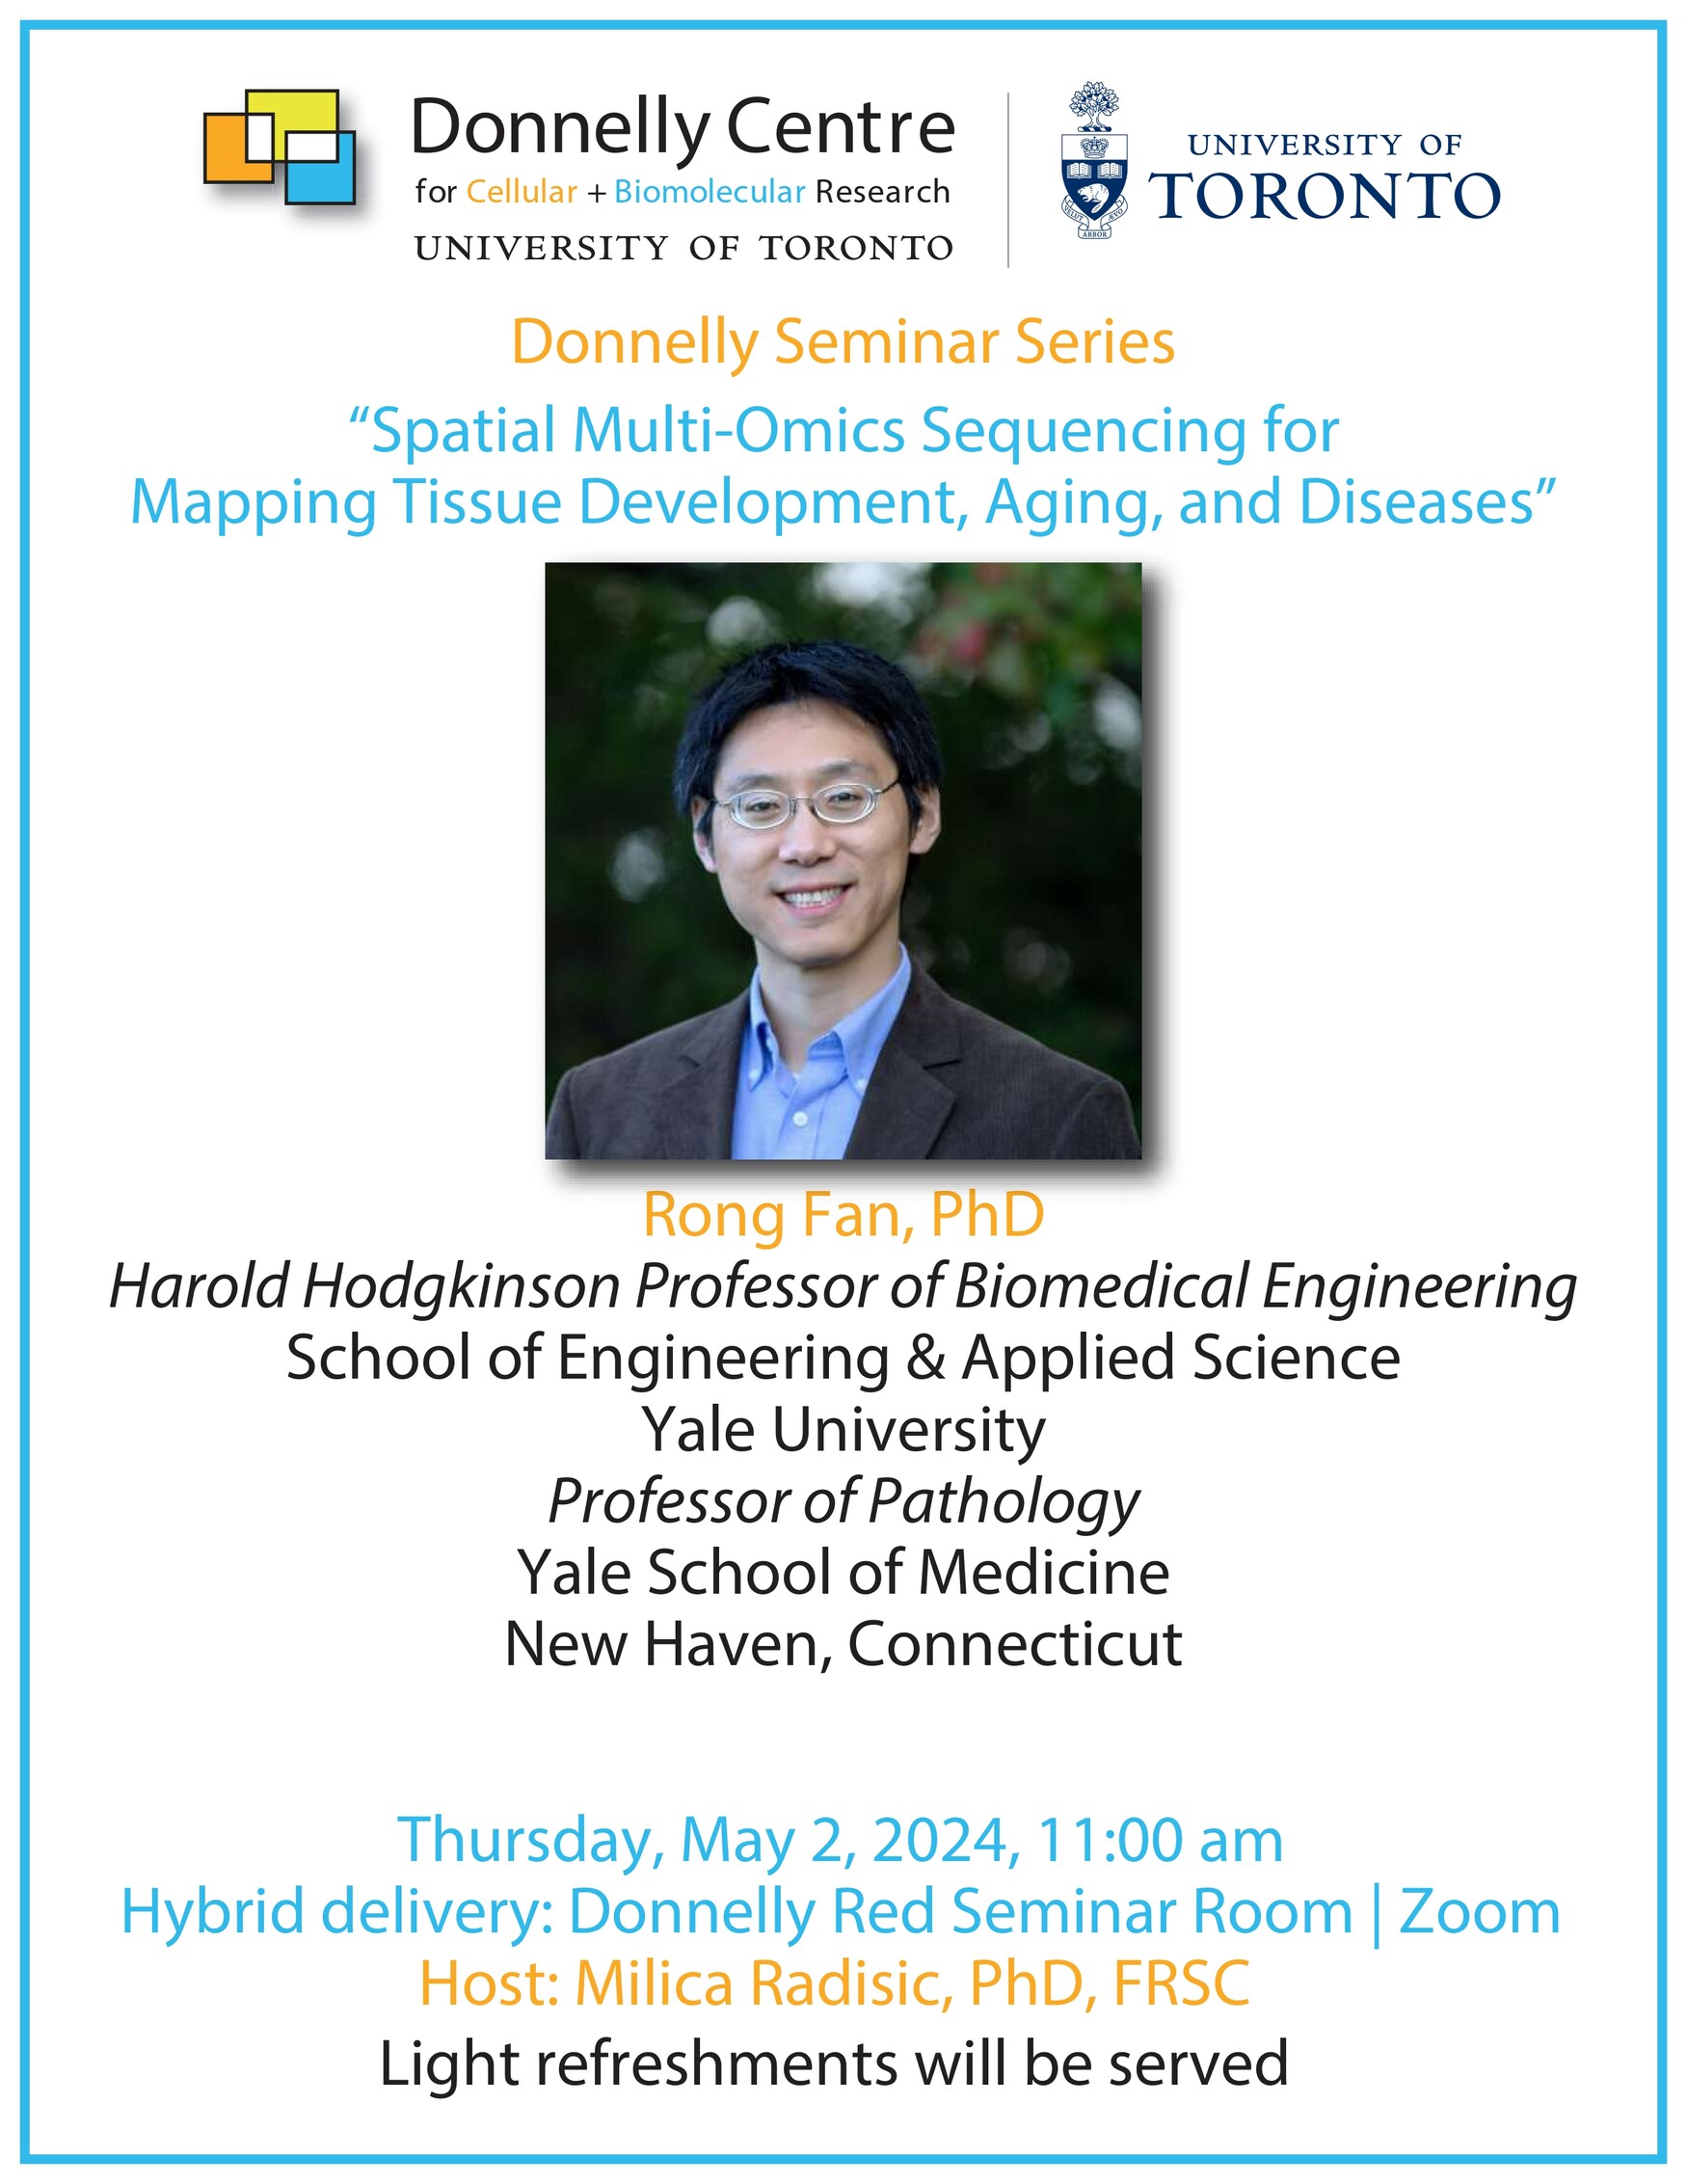 Poster for Donnelly Centre Seminar on "Spatial multi-omics sequencing"